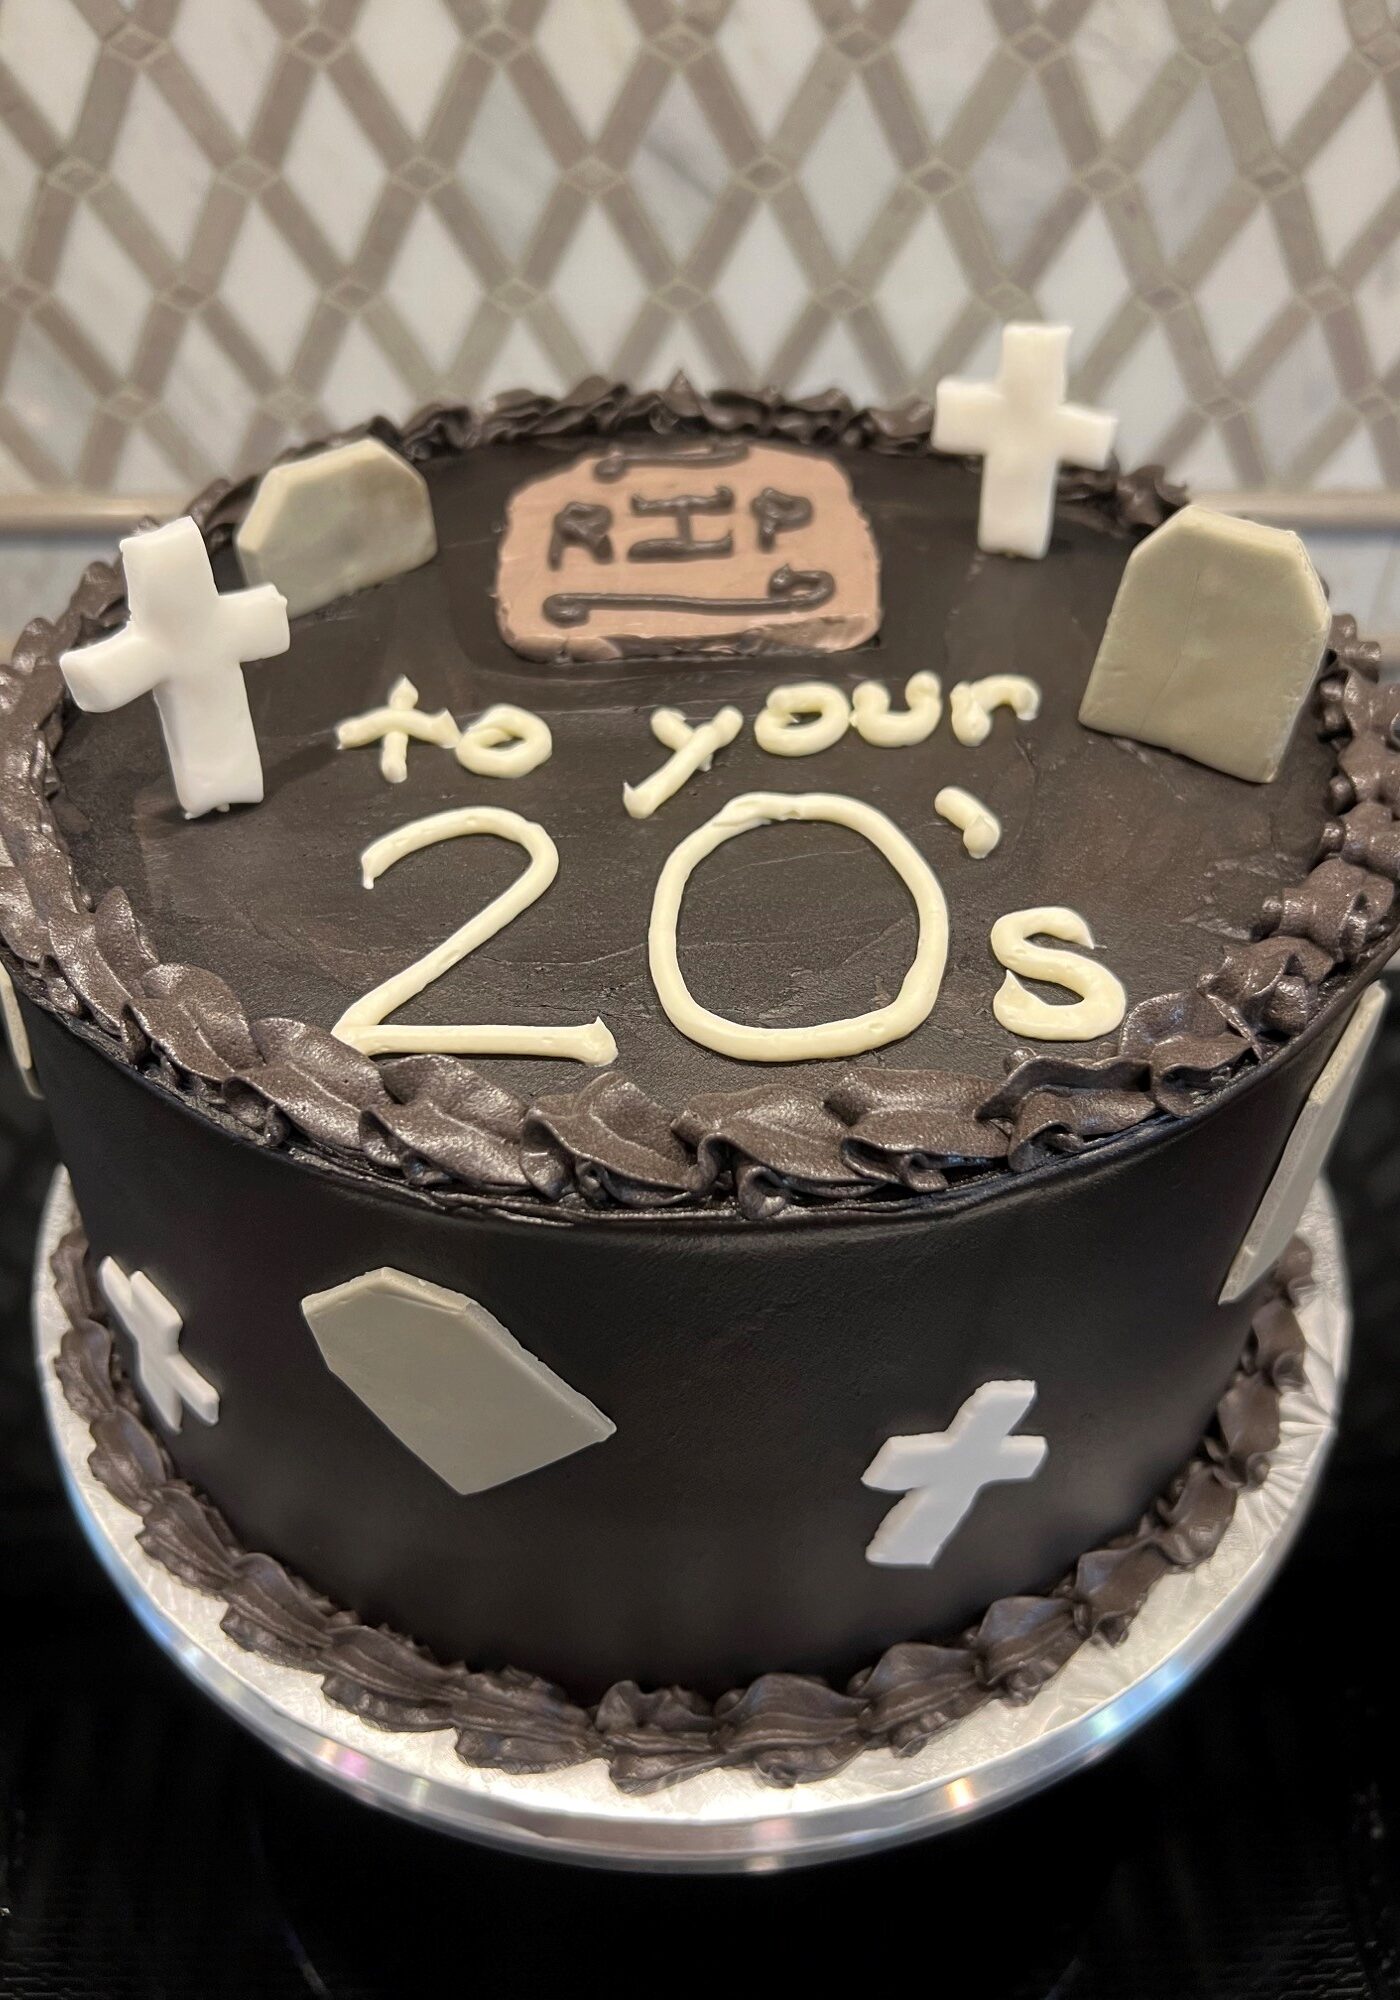 RIP to your 20's Cake full view April 30 2022